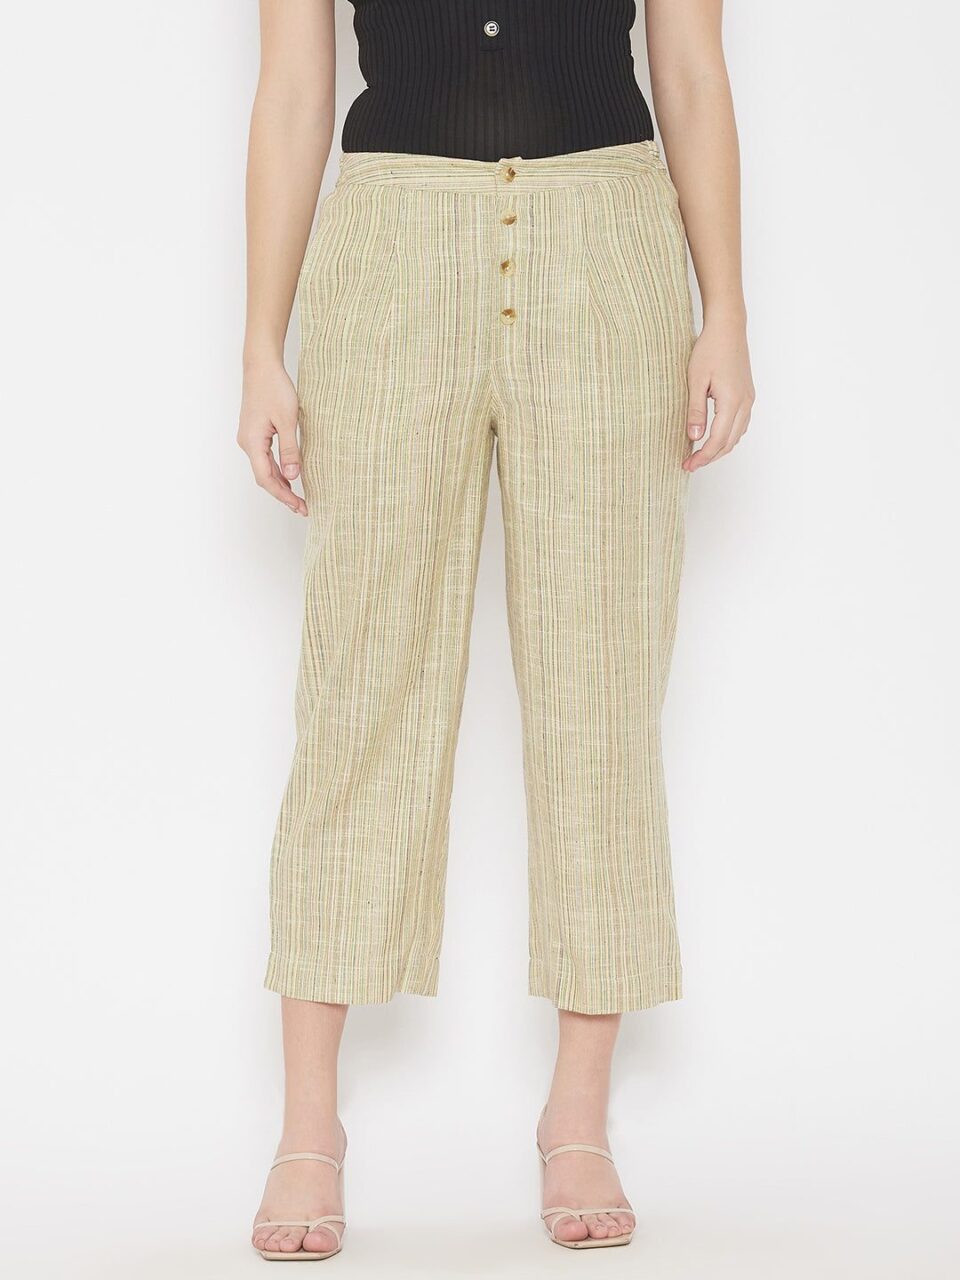 Green Regular Fit Cotton Texetured Trouser